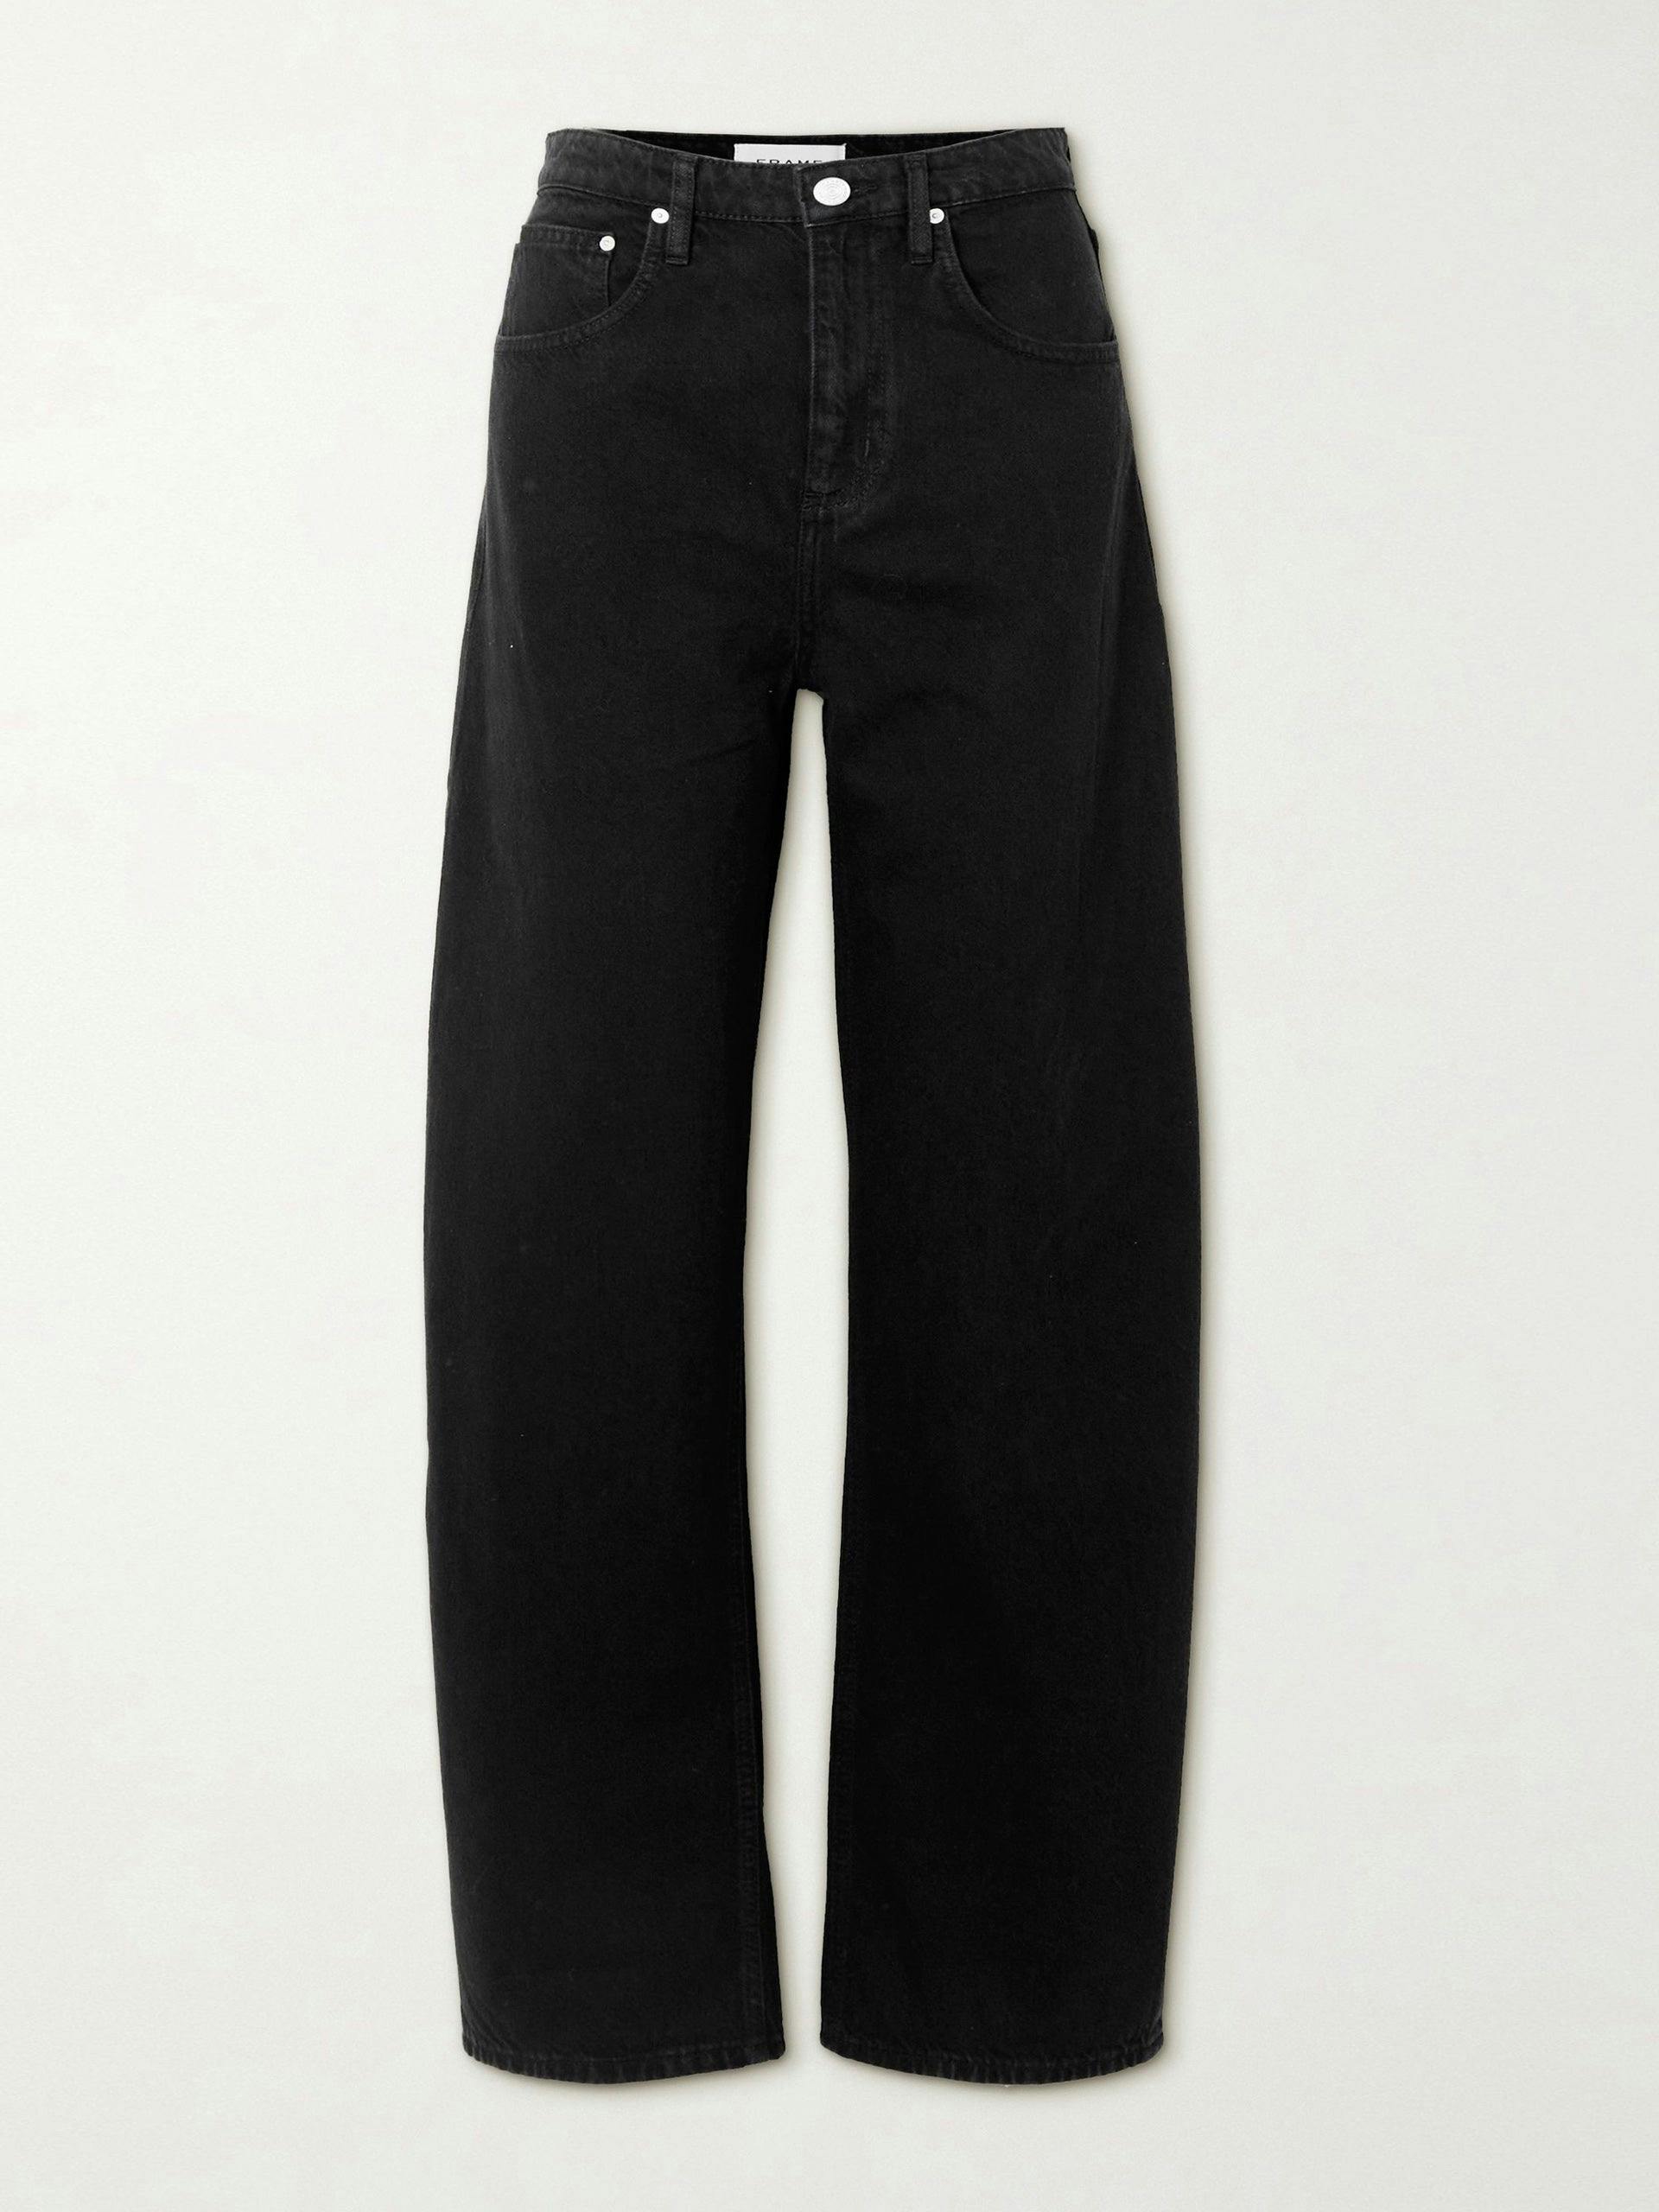 Black high-rise tapered jeans